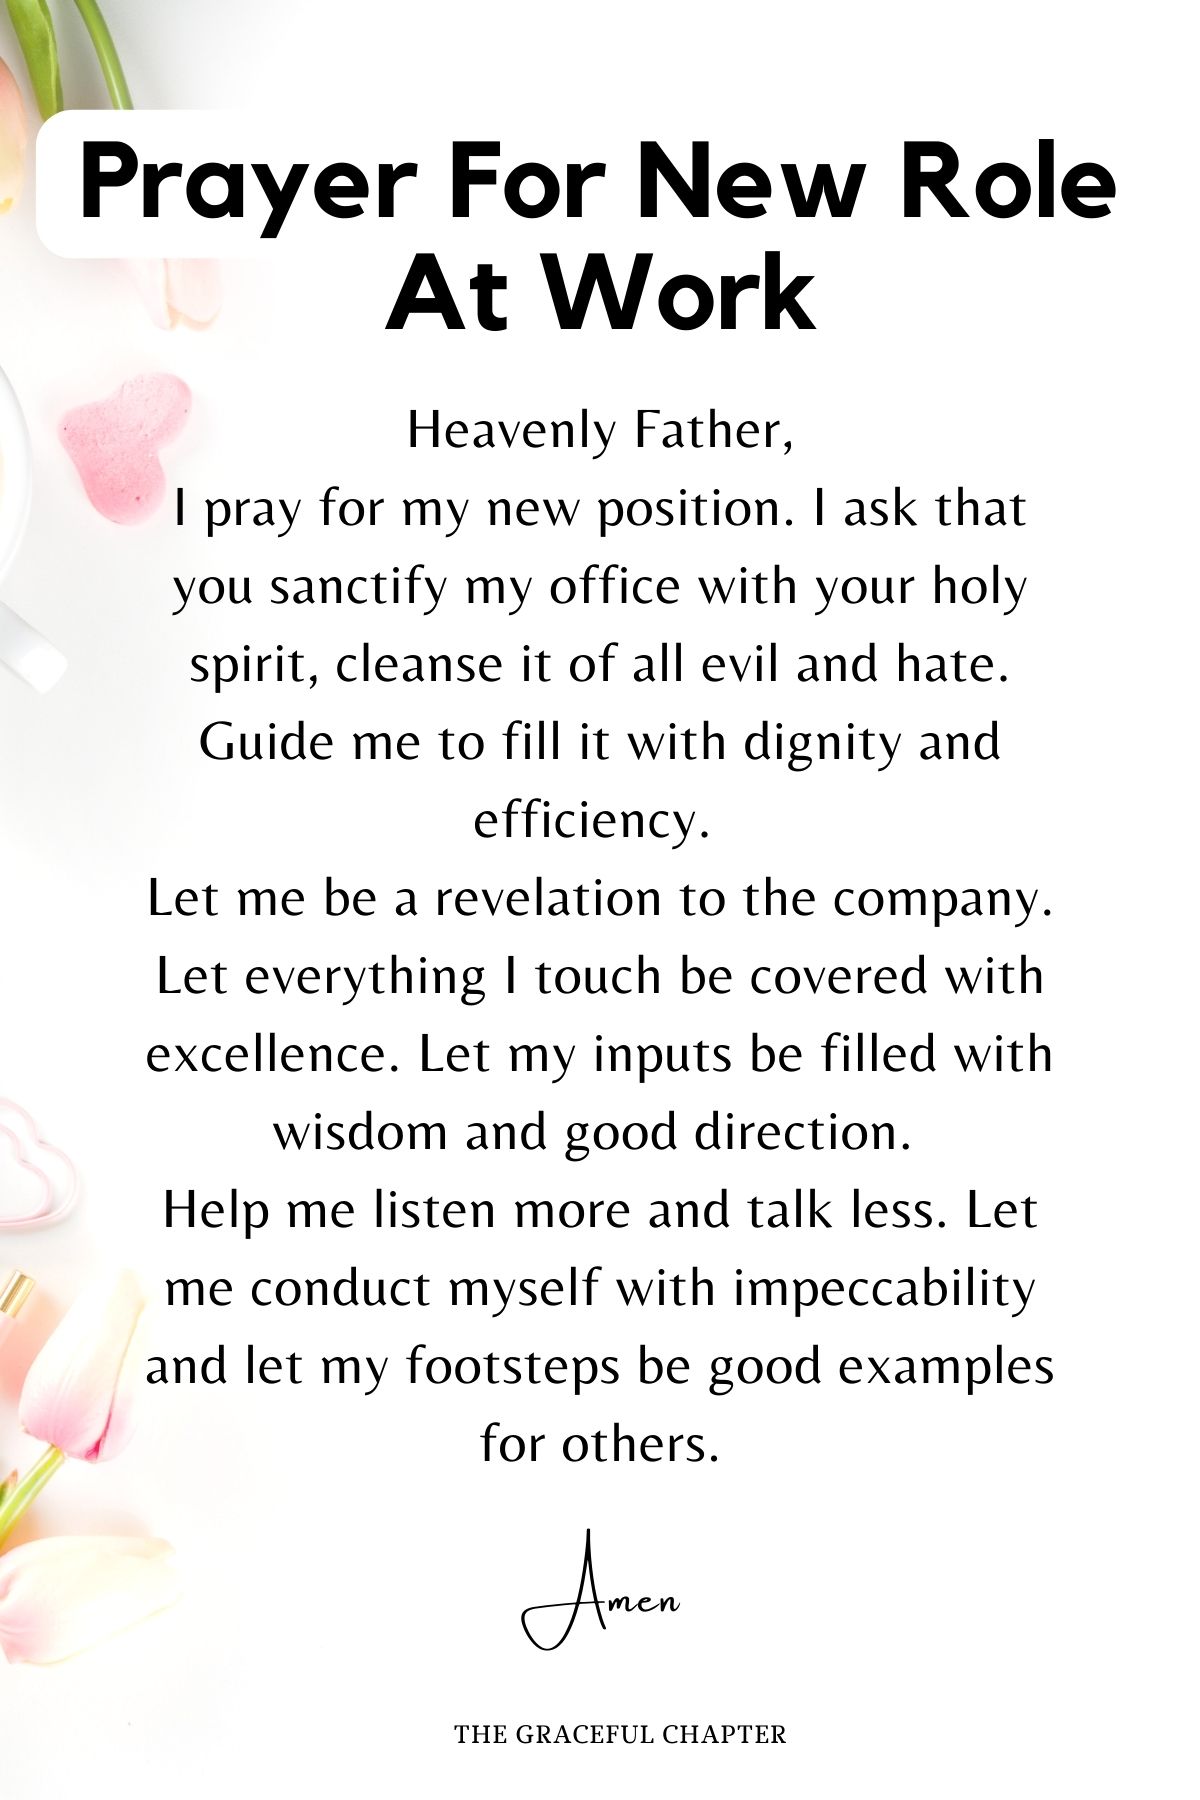 Prayer for new role at work